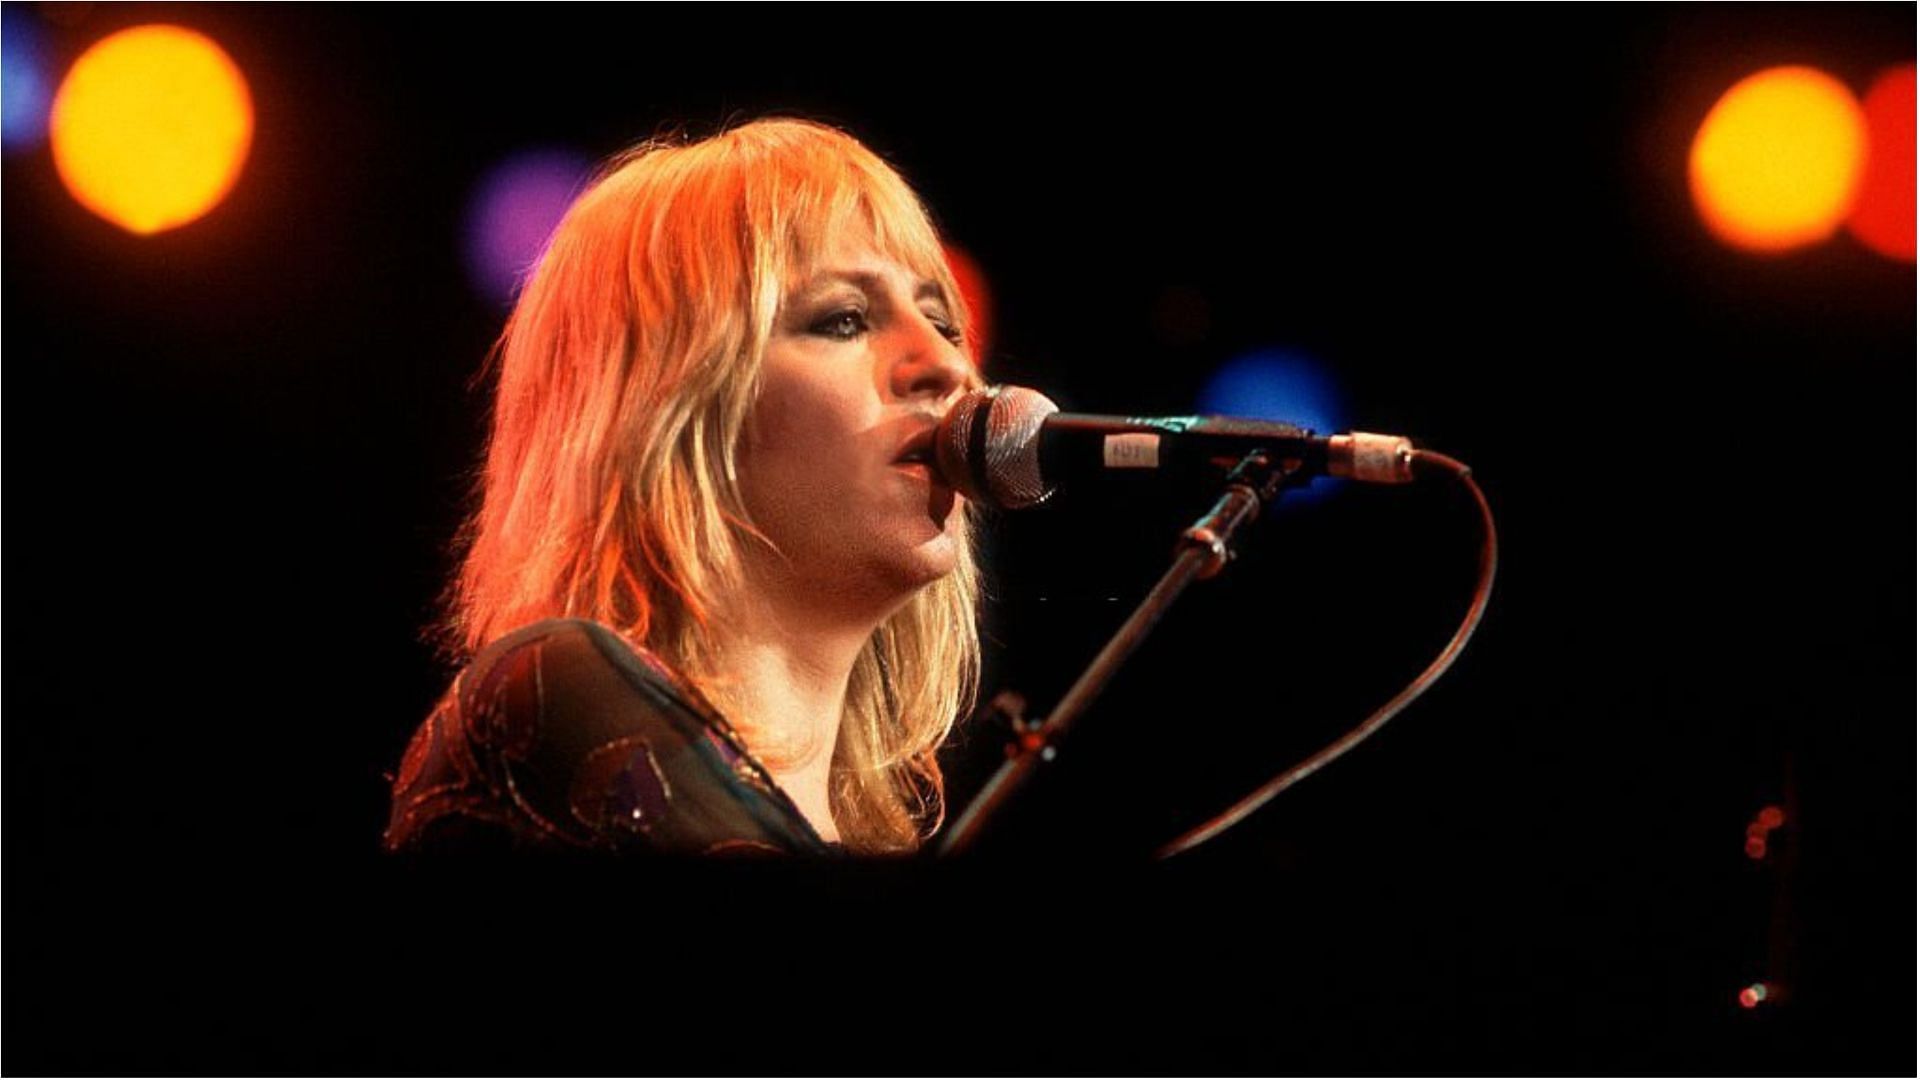 Christine McVie was 79 years old at the time of death (Image via Paul Natkin/Getty Images)